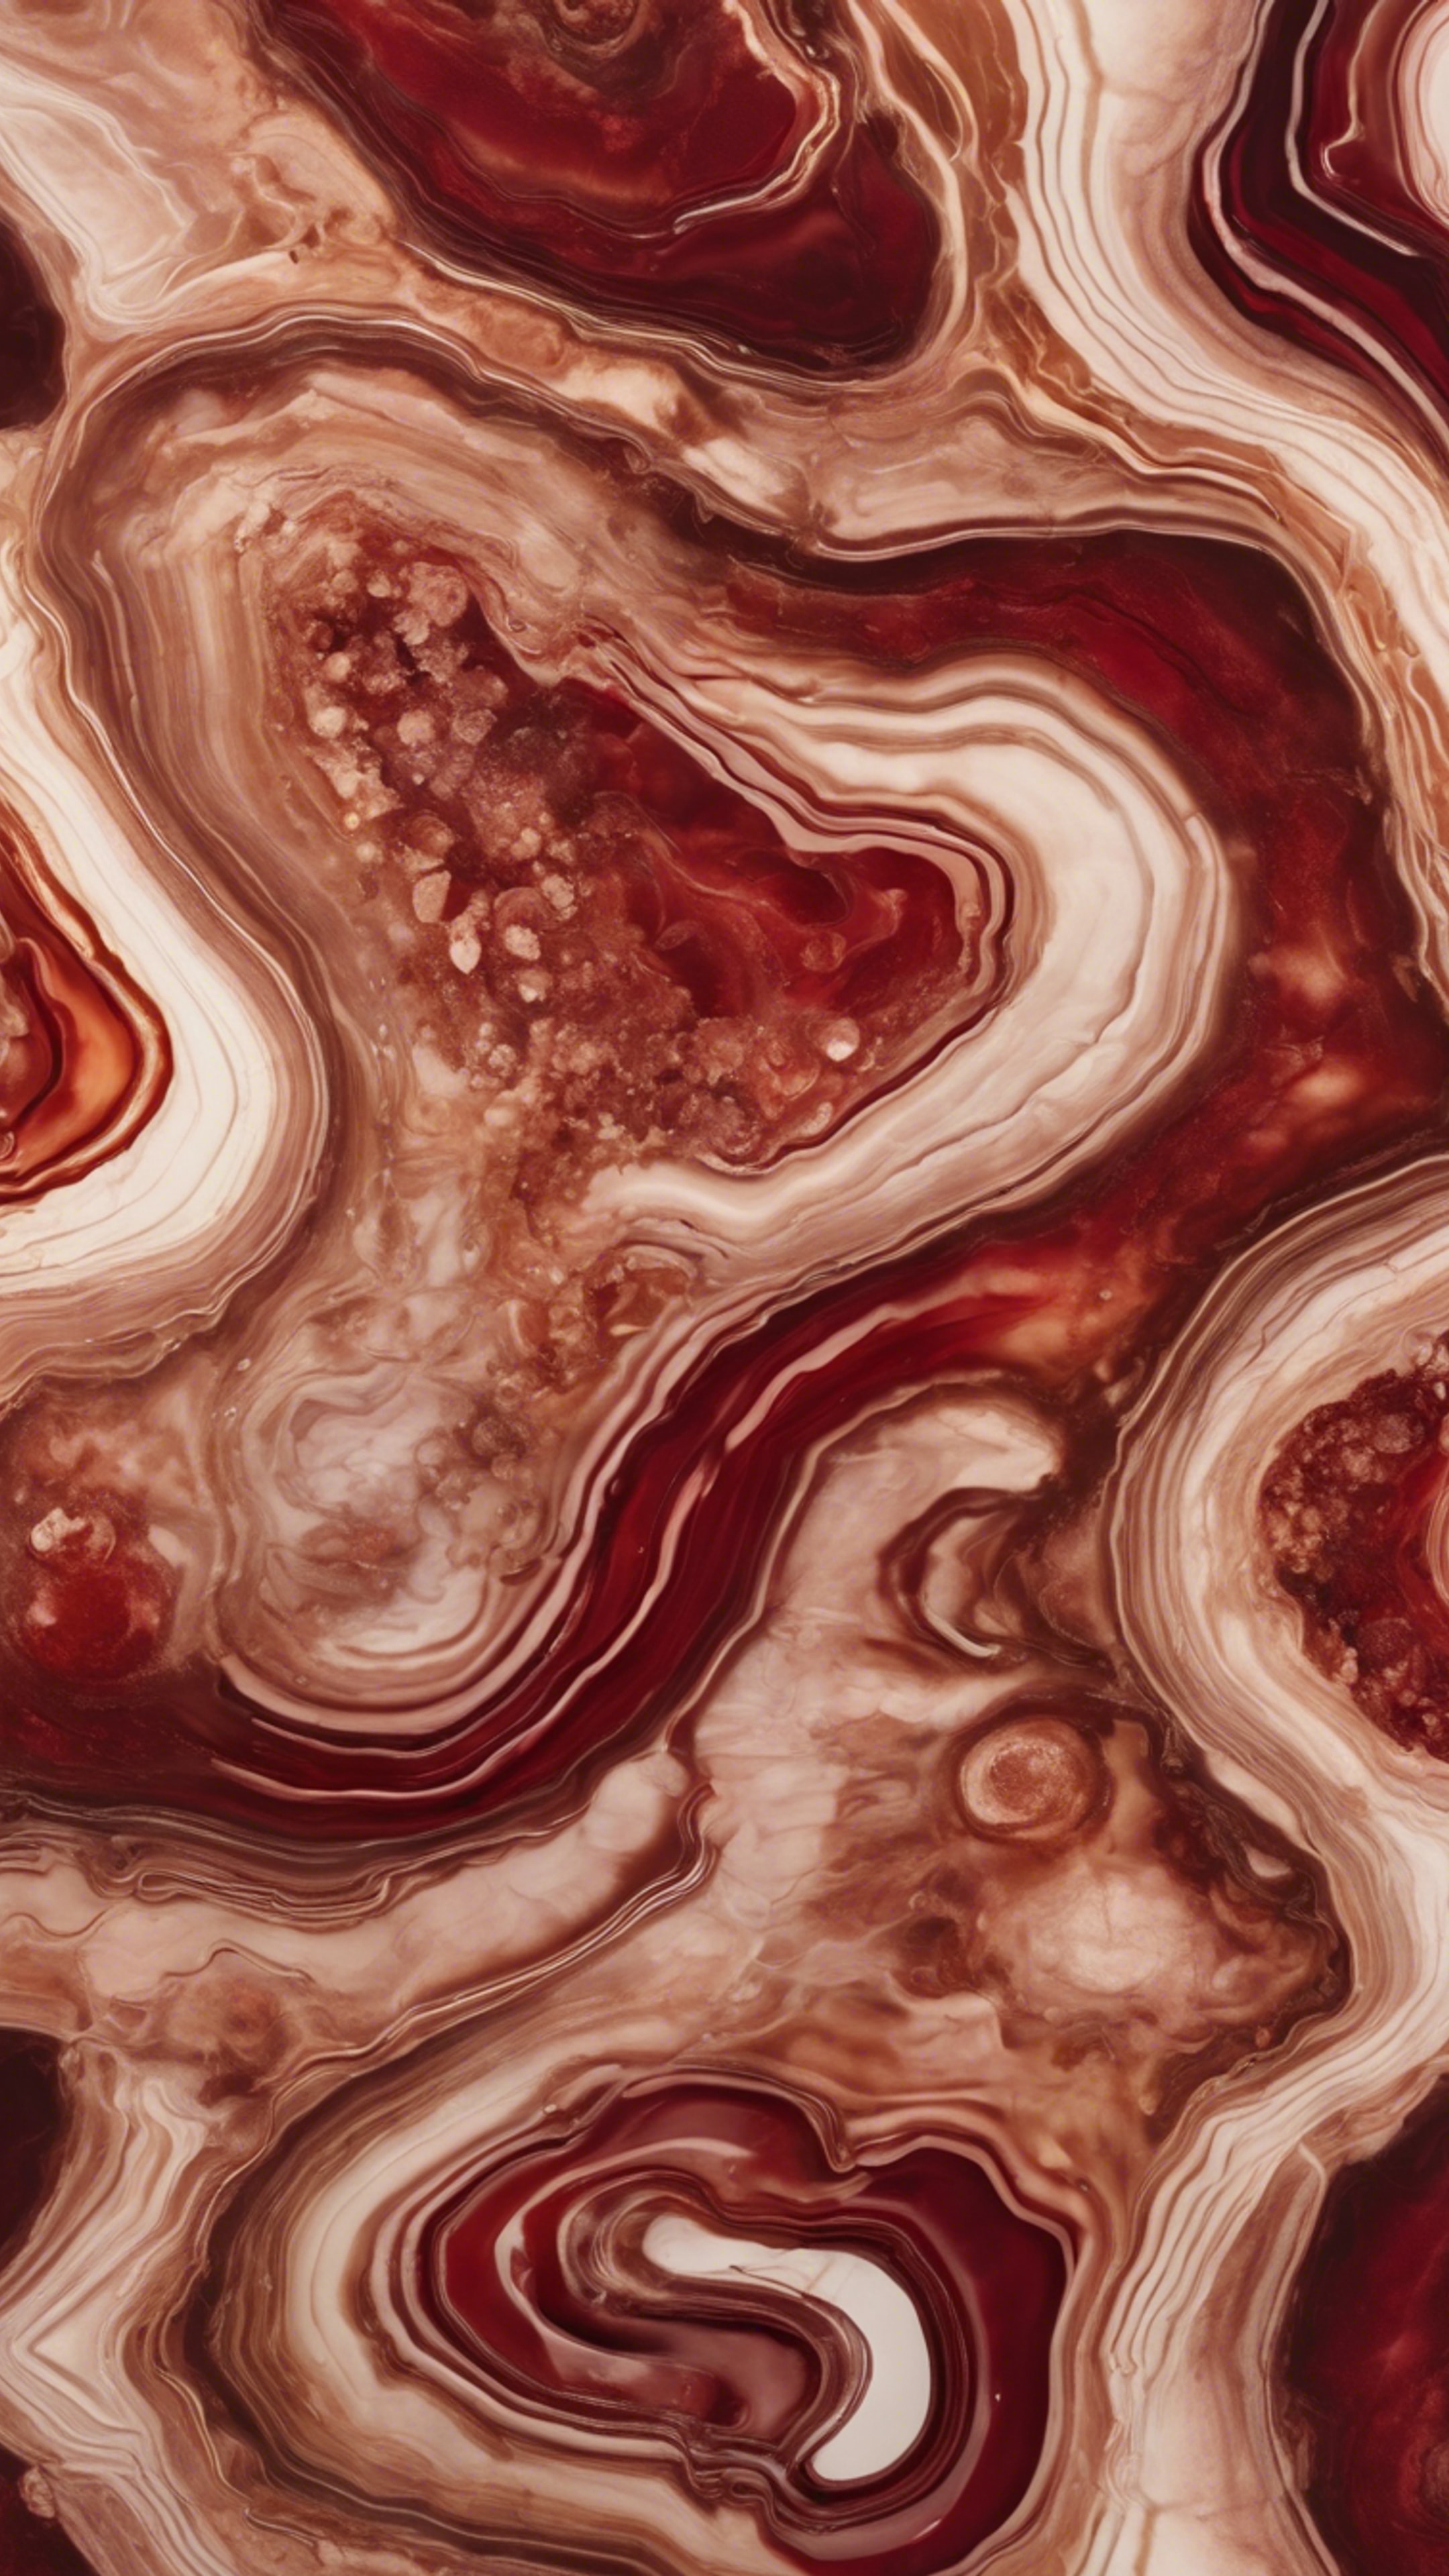 Grungy agate swirls in garnet red and sepia tones, forming a fascinating, abstract pattern. 墙纸[bb48f1c473e4473bbd4a]